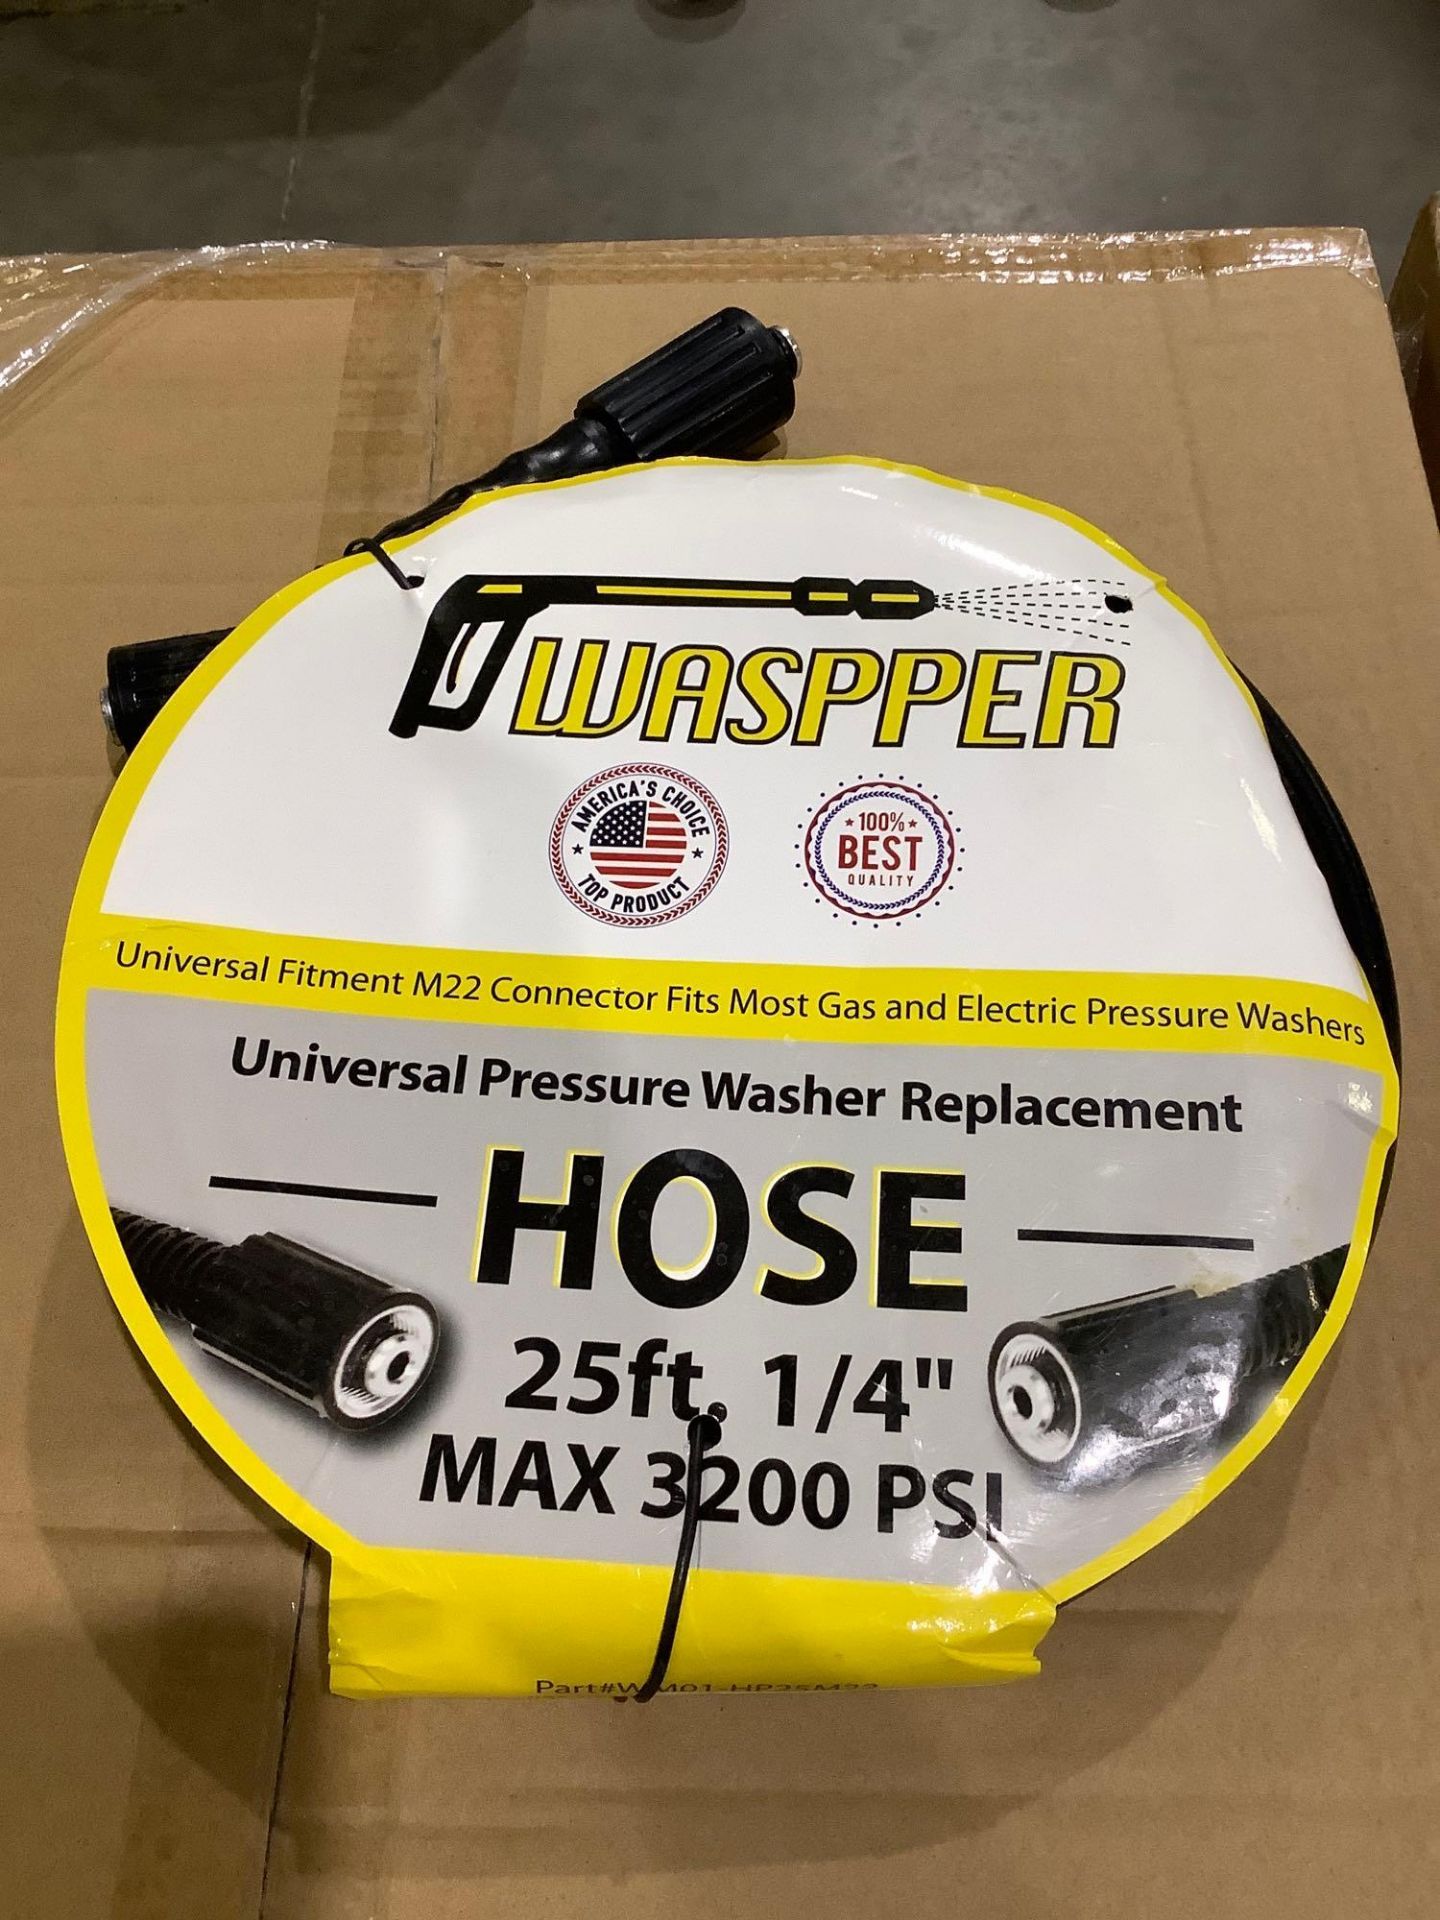 PALLET OF WASPPER 25FT PRESSURE WASHER HOSE, APPROX 1/4” MAX 3200PSI , APPROX 200 TOTAL ( APPROX 20